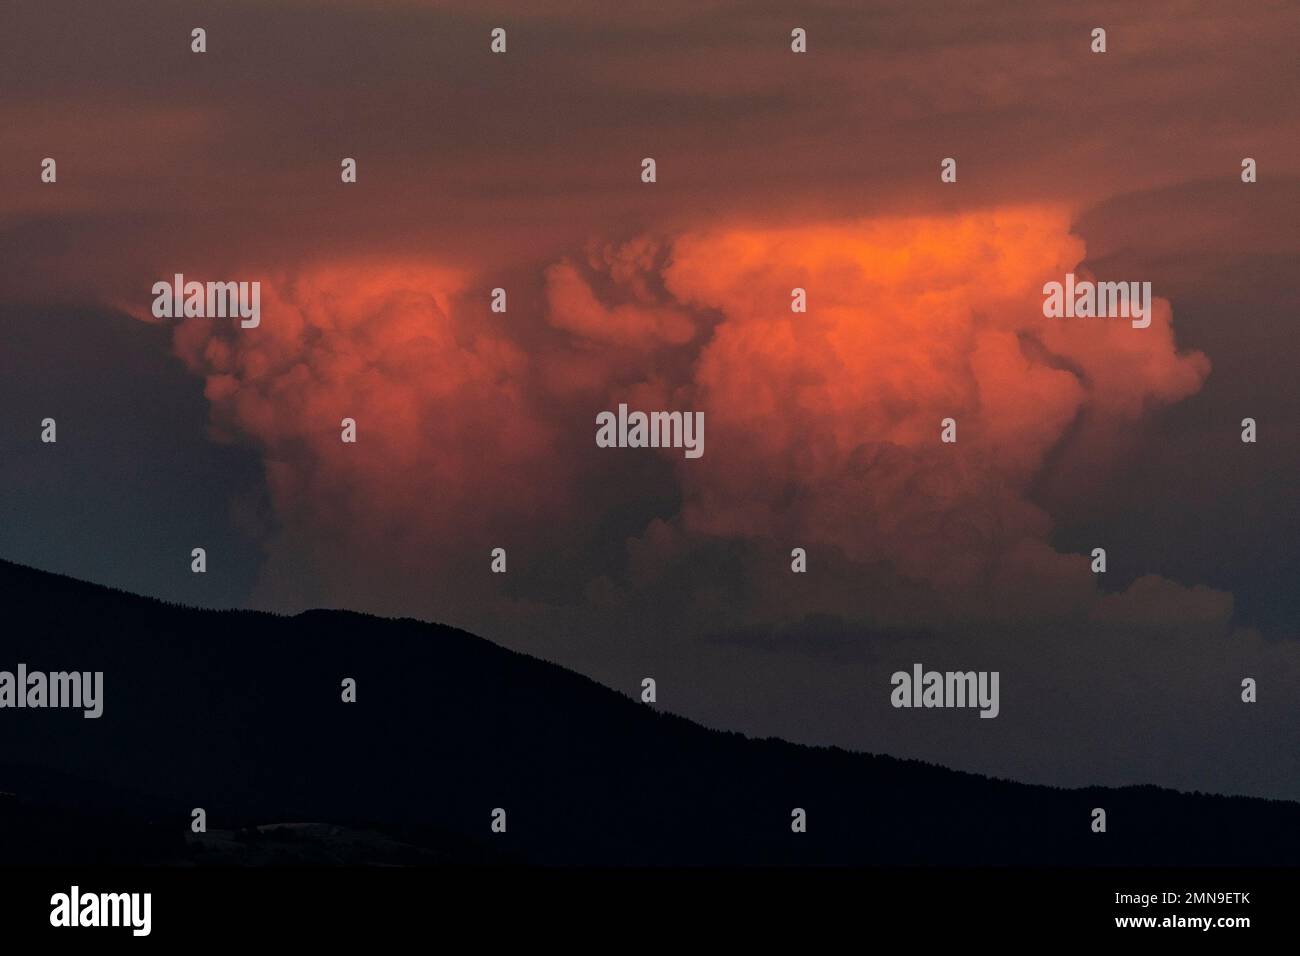 View of the sky with cumulonimbus clouds at sunset Stock Photo